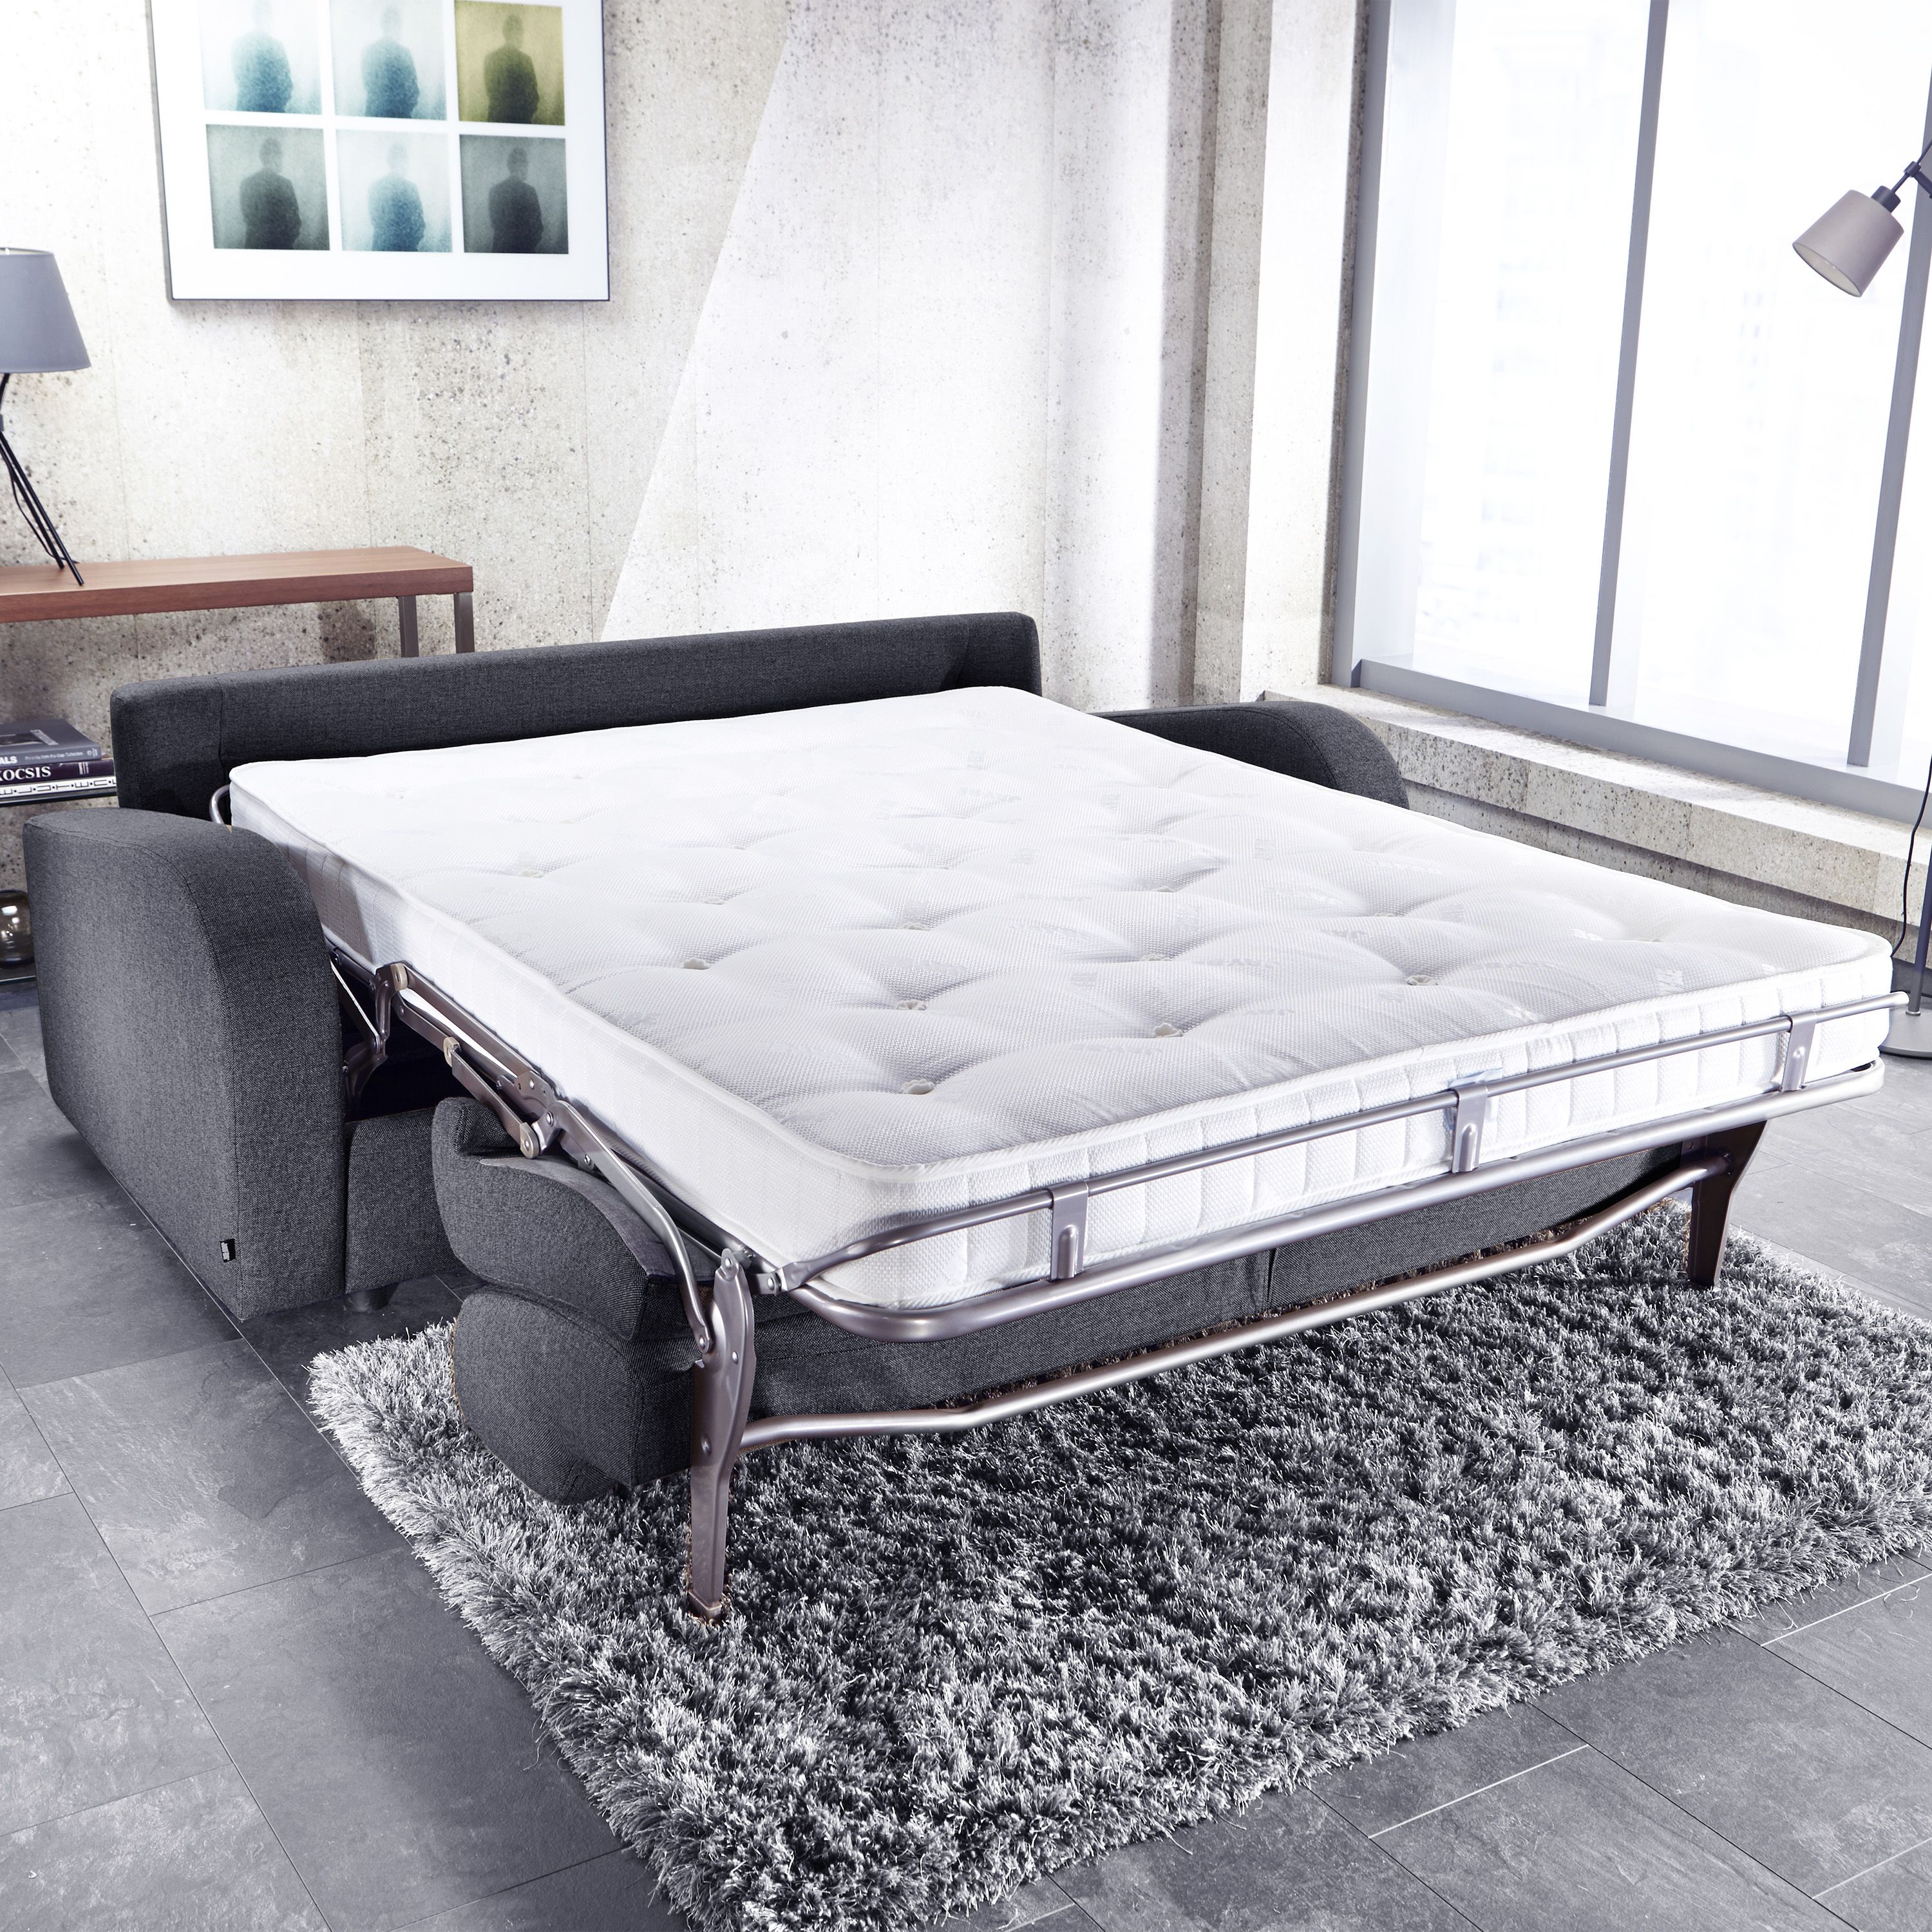 Jay-Be Retro Raven 3 Seater Sofa bed